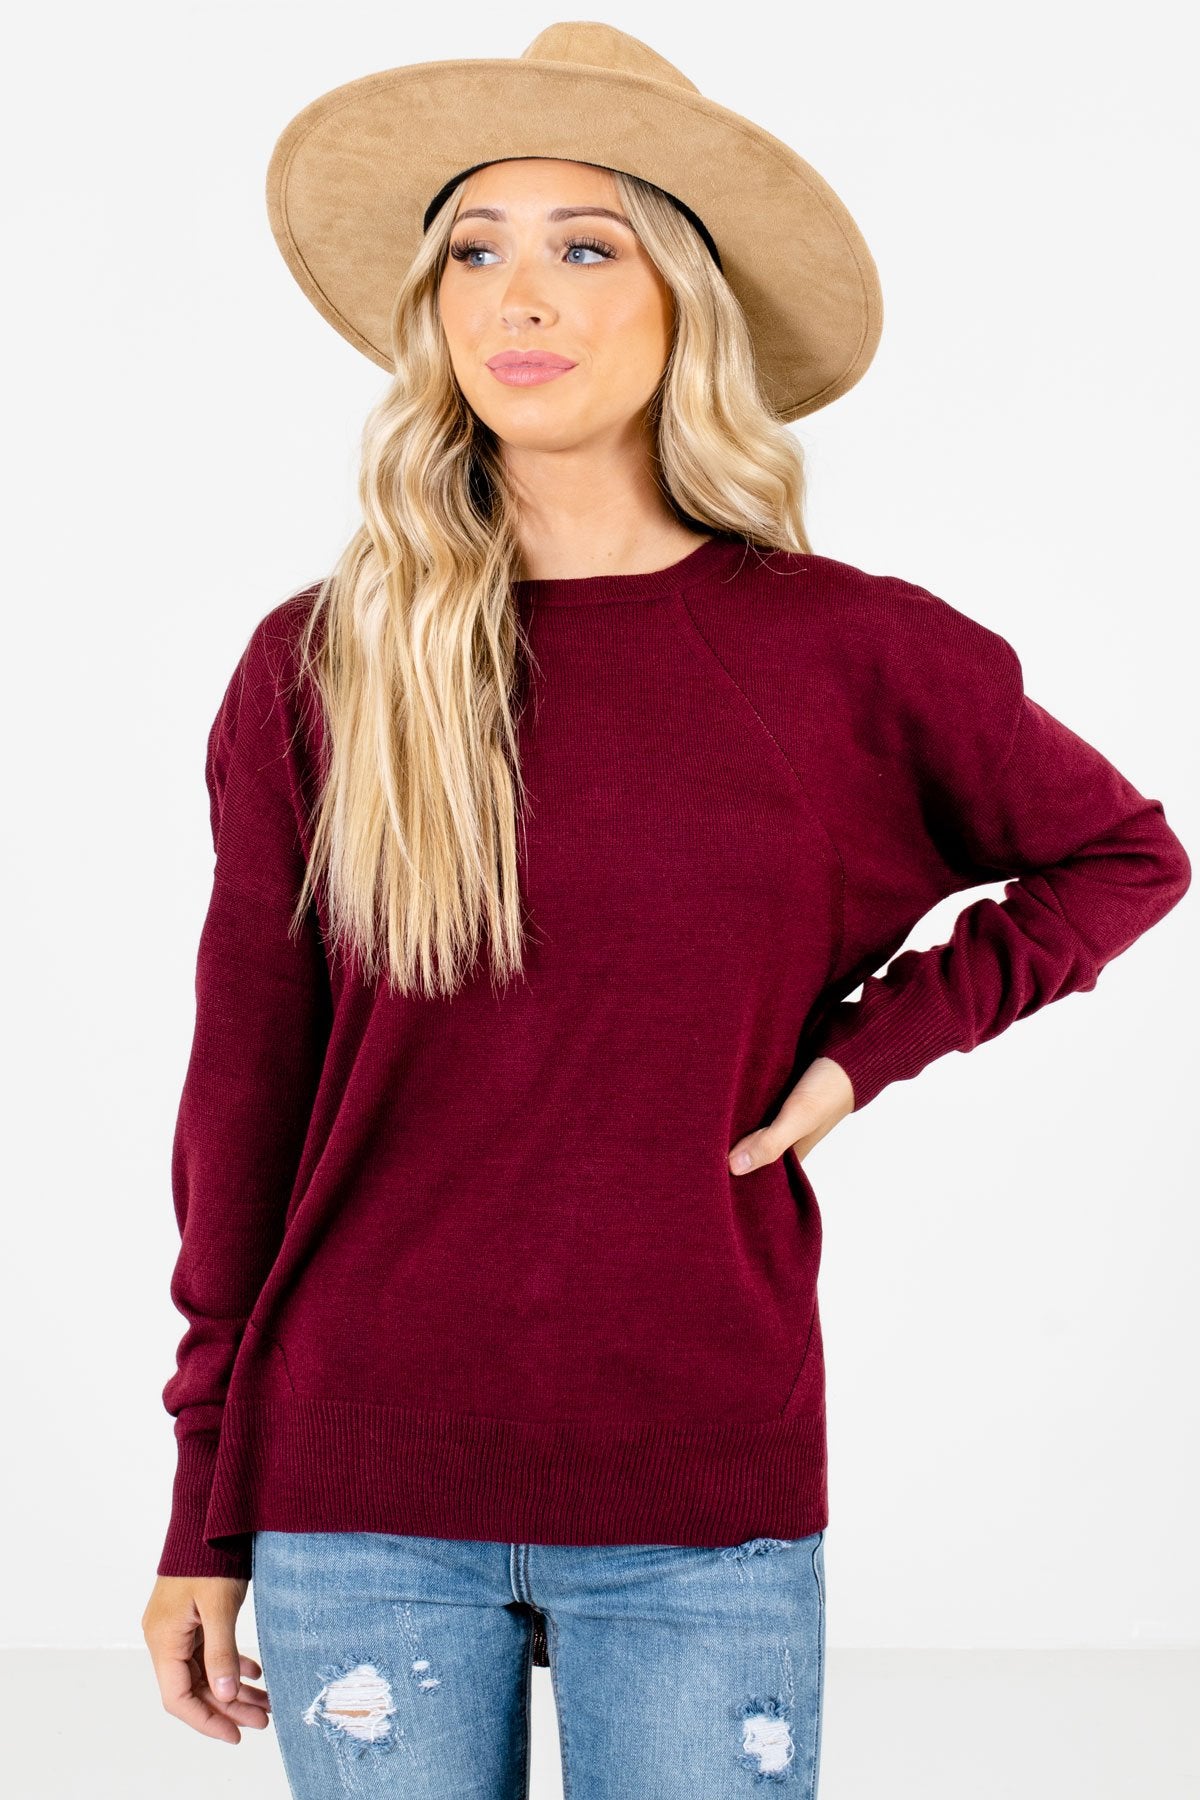 Women’s Burgundy Warm and Cozy Boutique Sweater